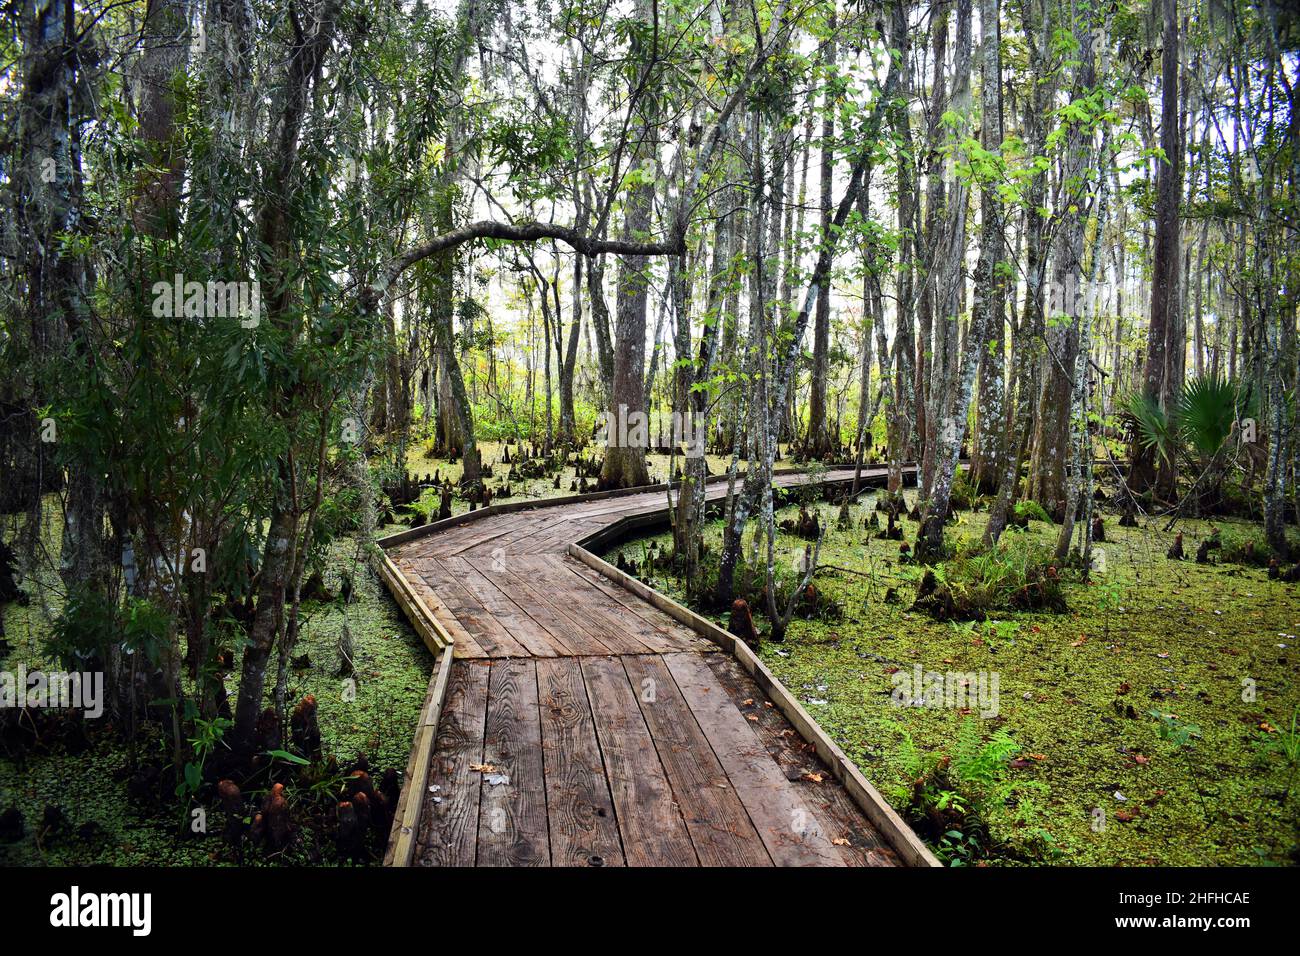 A wooden boardwalk surrounded by trees leads through a swamp Stock Photo